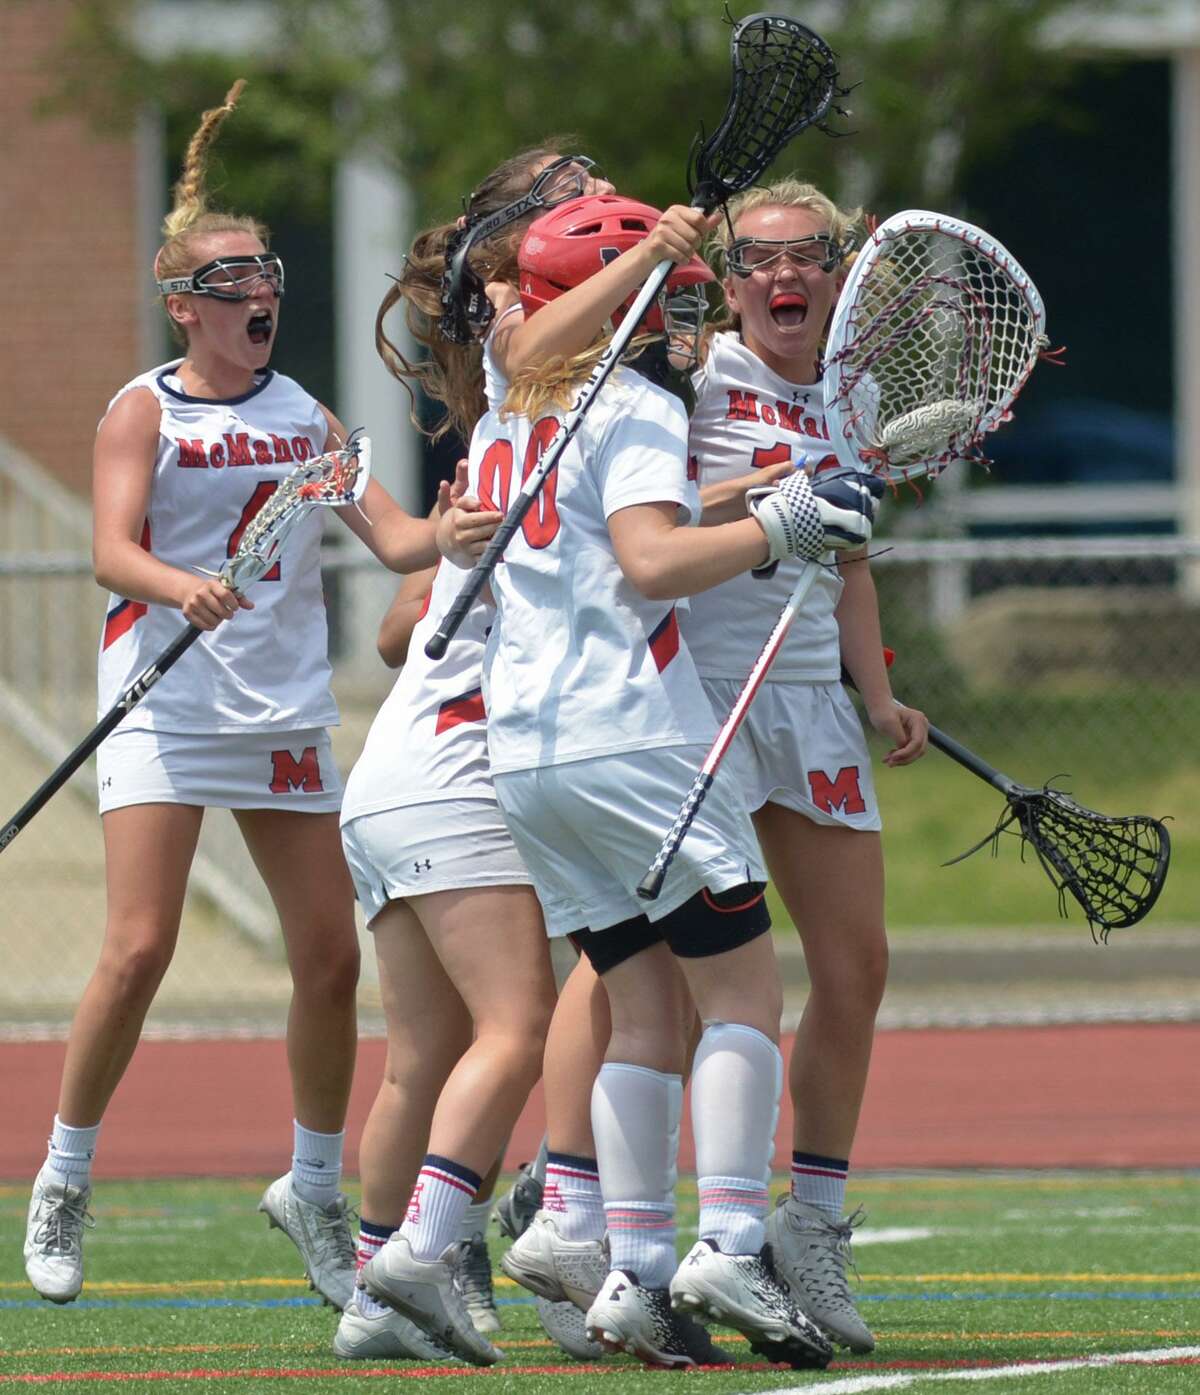 Girls lacrosse: McMahon gets revenge on Trumbull in state qualifier